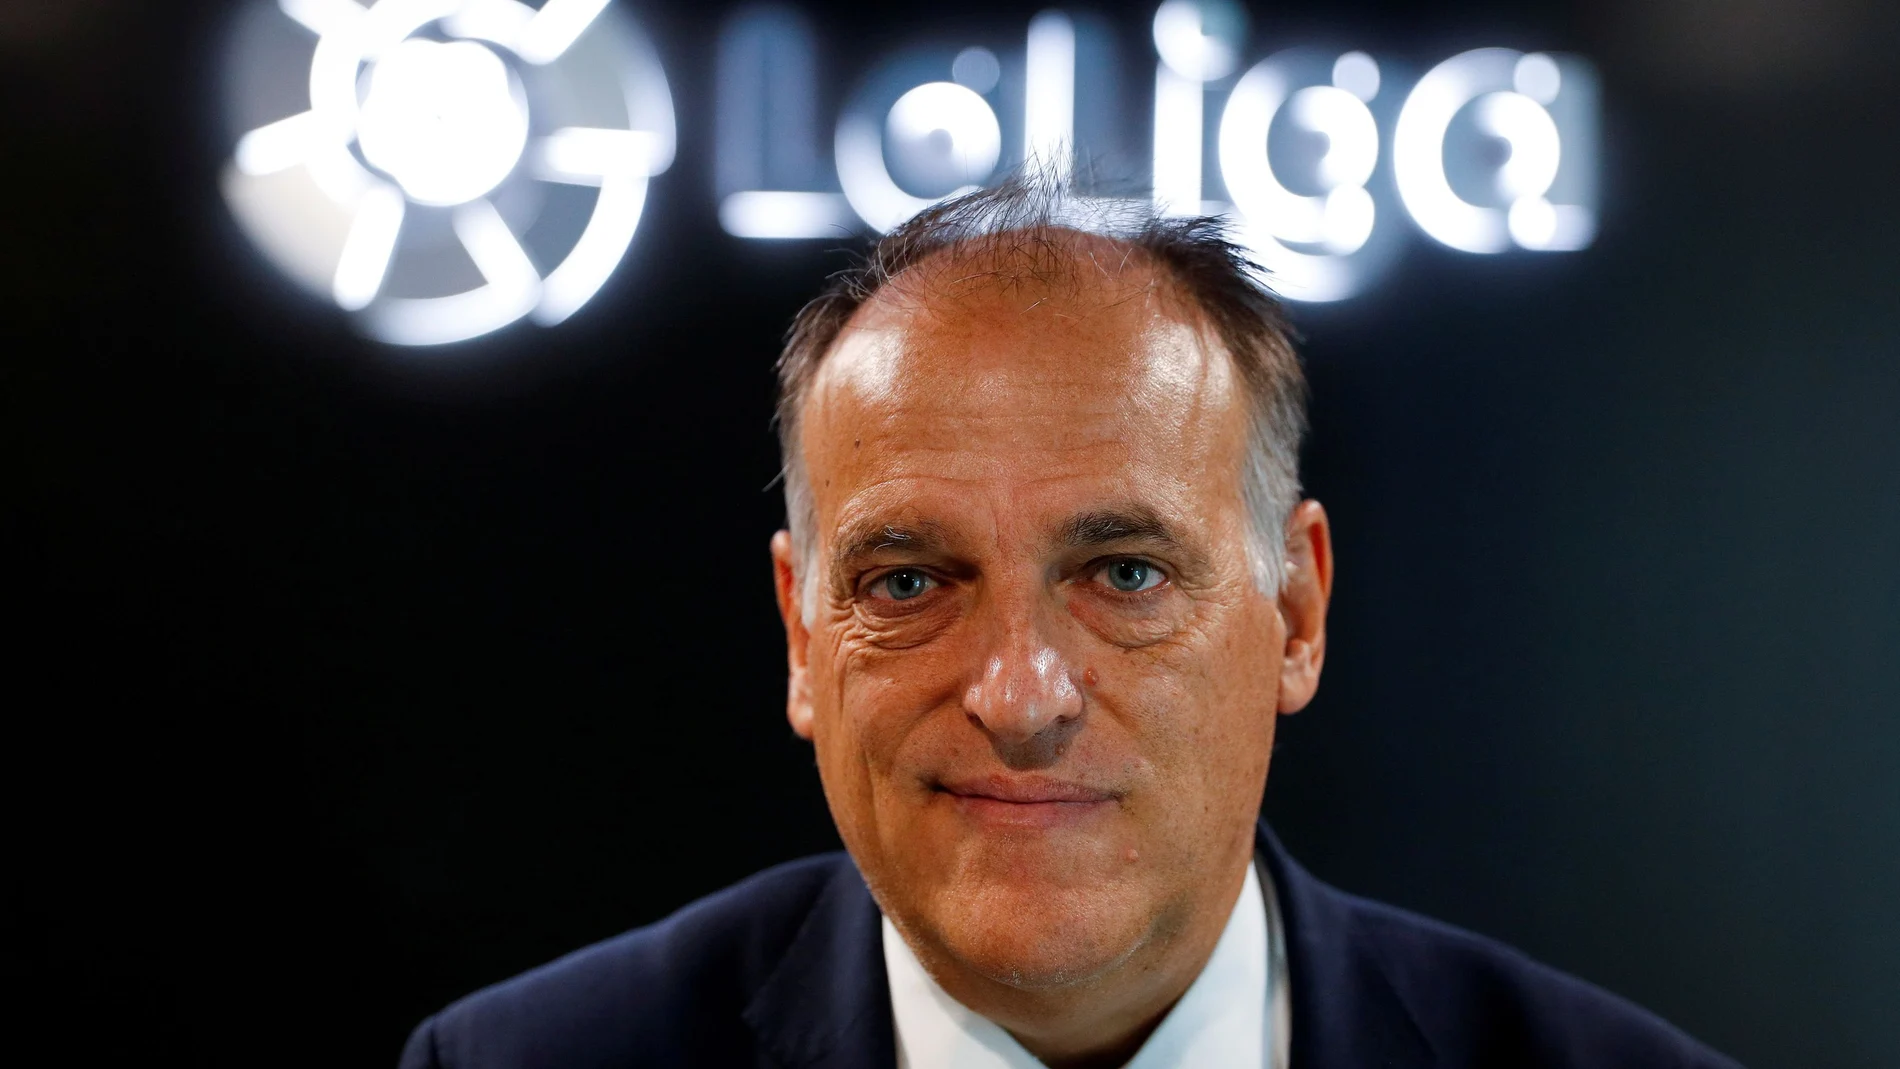 FILE PHOTO: La Liga President Javier Tebas poses during an interview with Reuters at the La Liga headquarters in Madrid